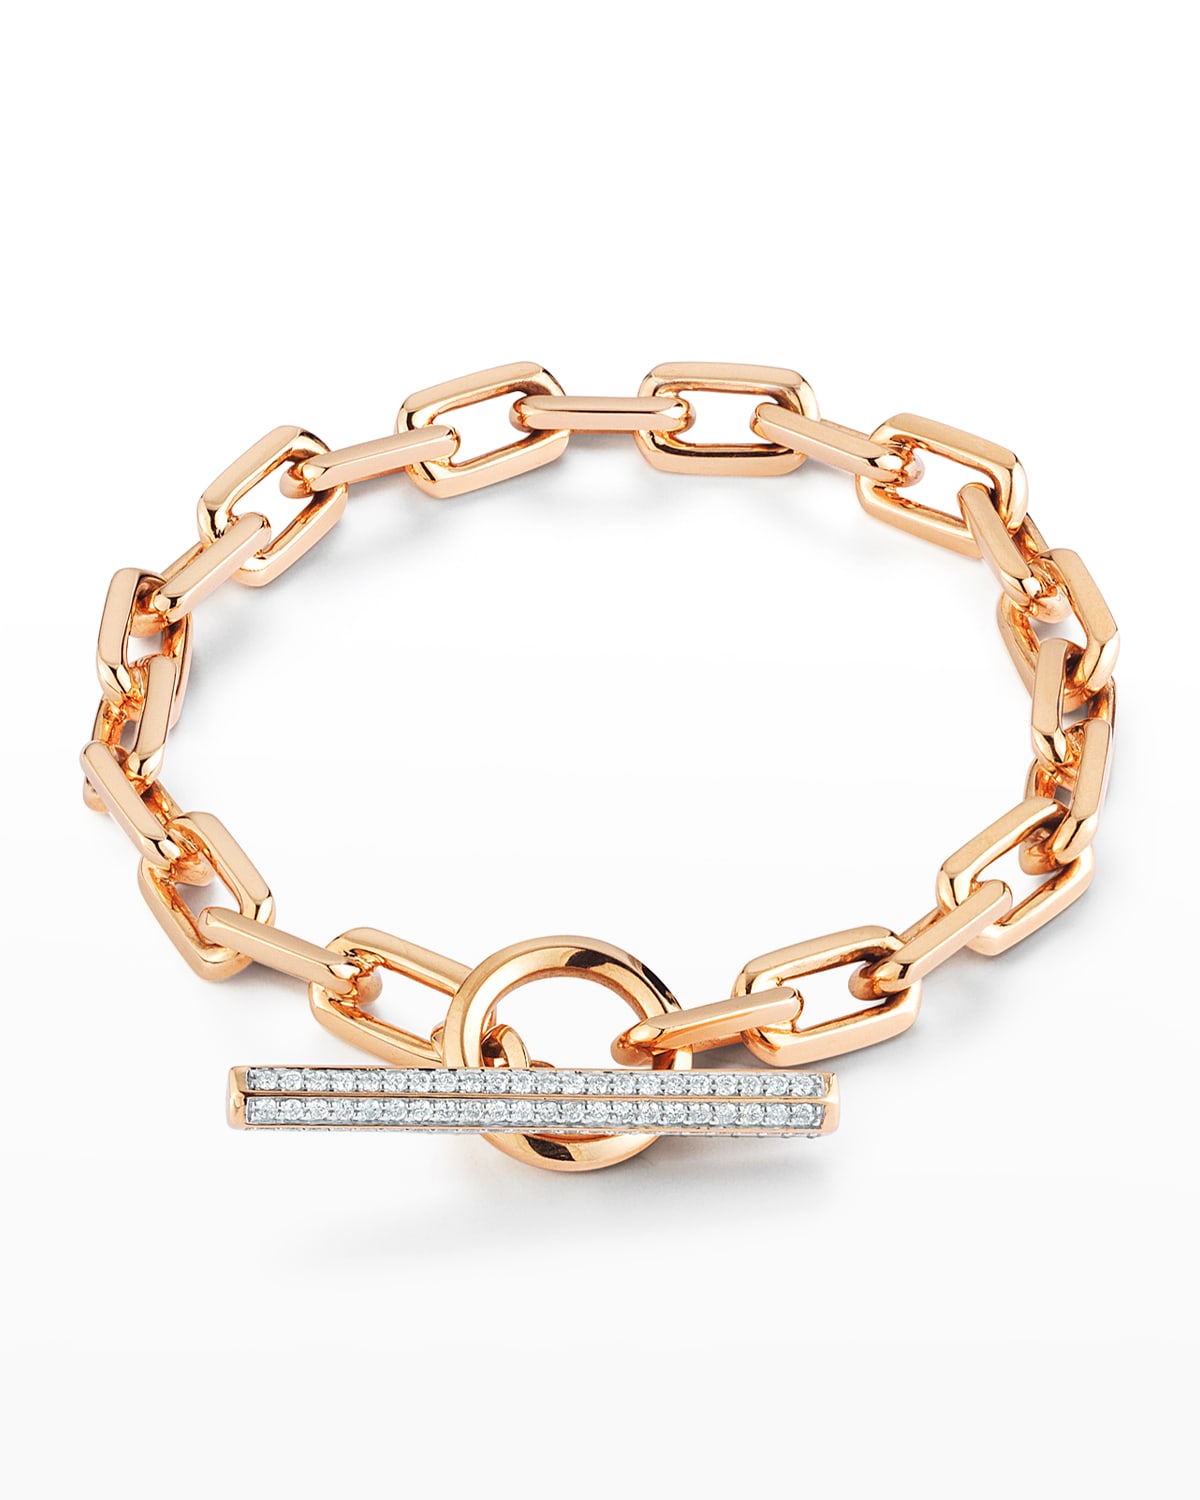 WALTERS FAITH 18K ROSE GOLD AND DIAMOND CHAIN LINK TOGGLE BRACELET